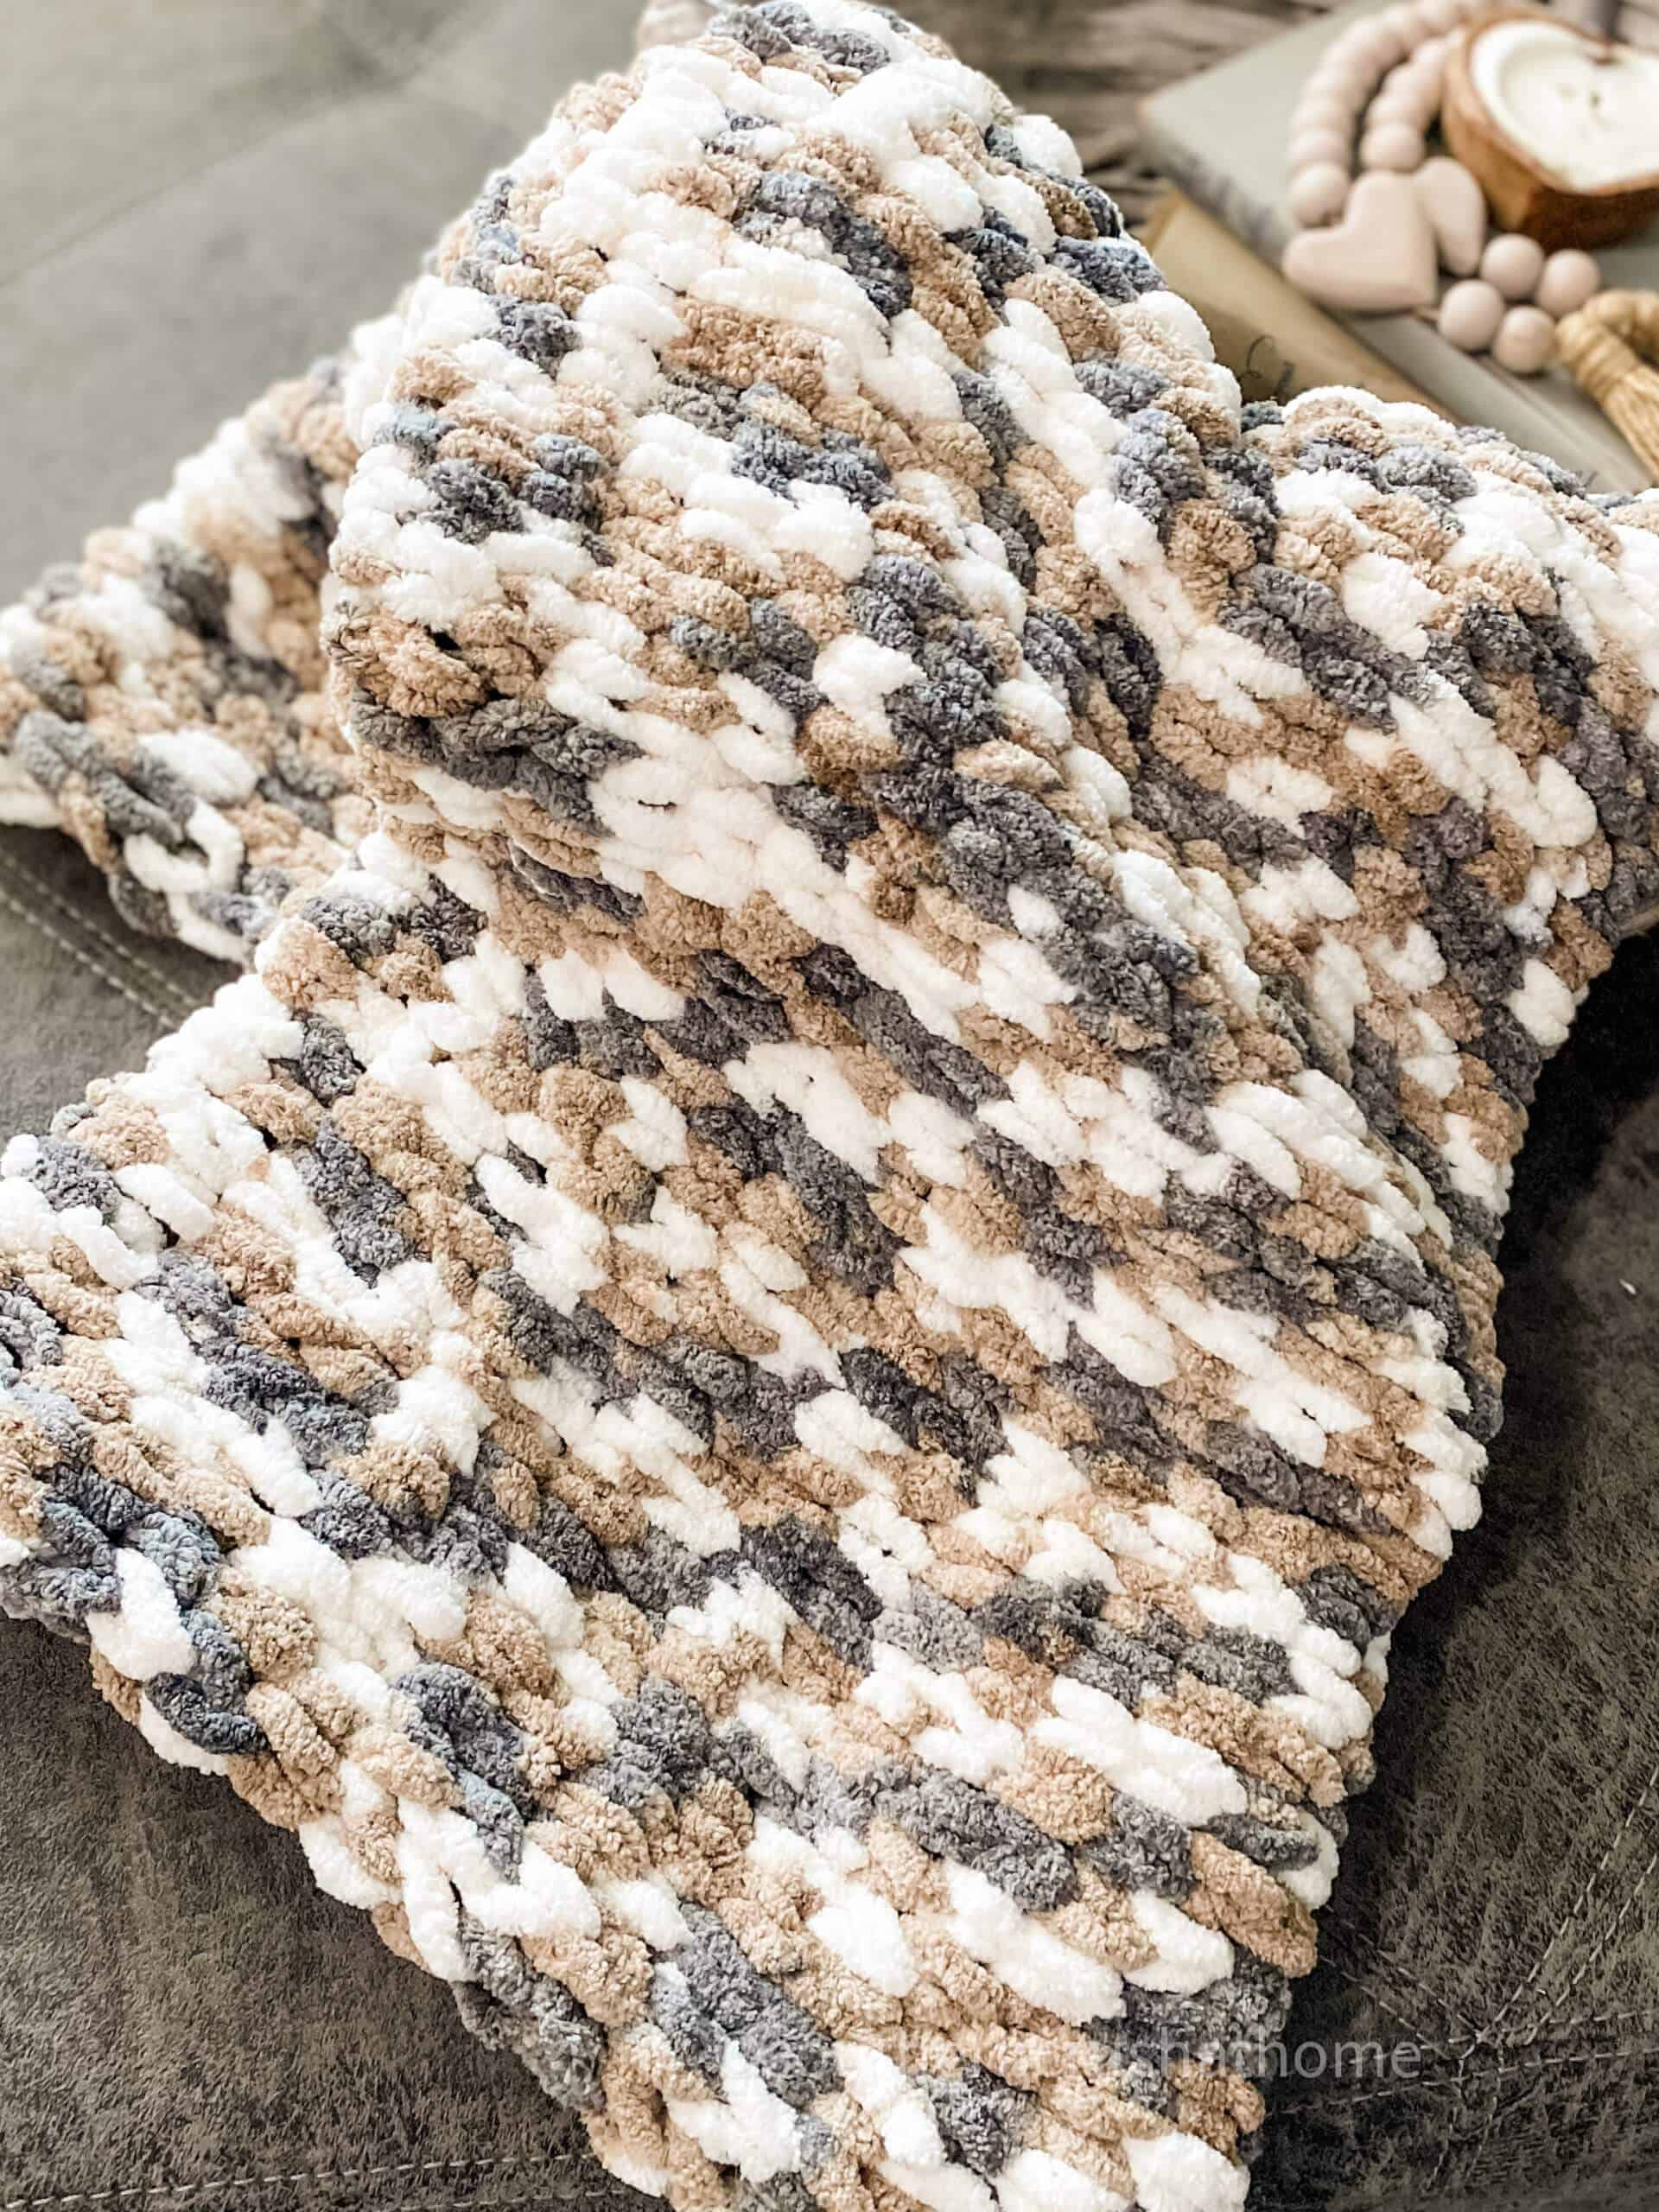 Chunky Loop Hand-Knit Blanket for Beginners - Southern Crush at Home